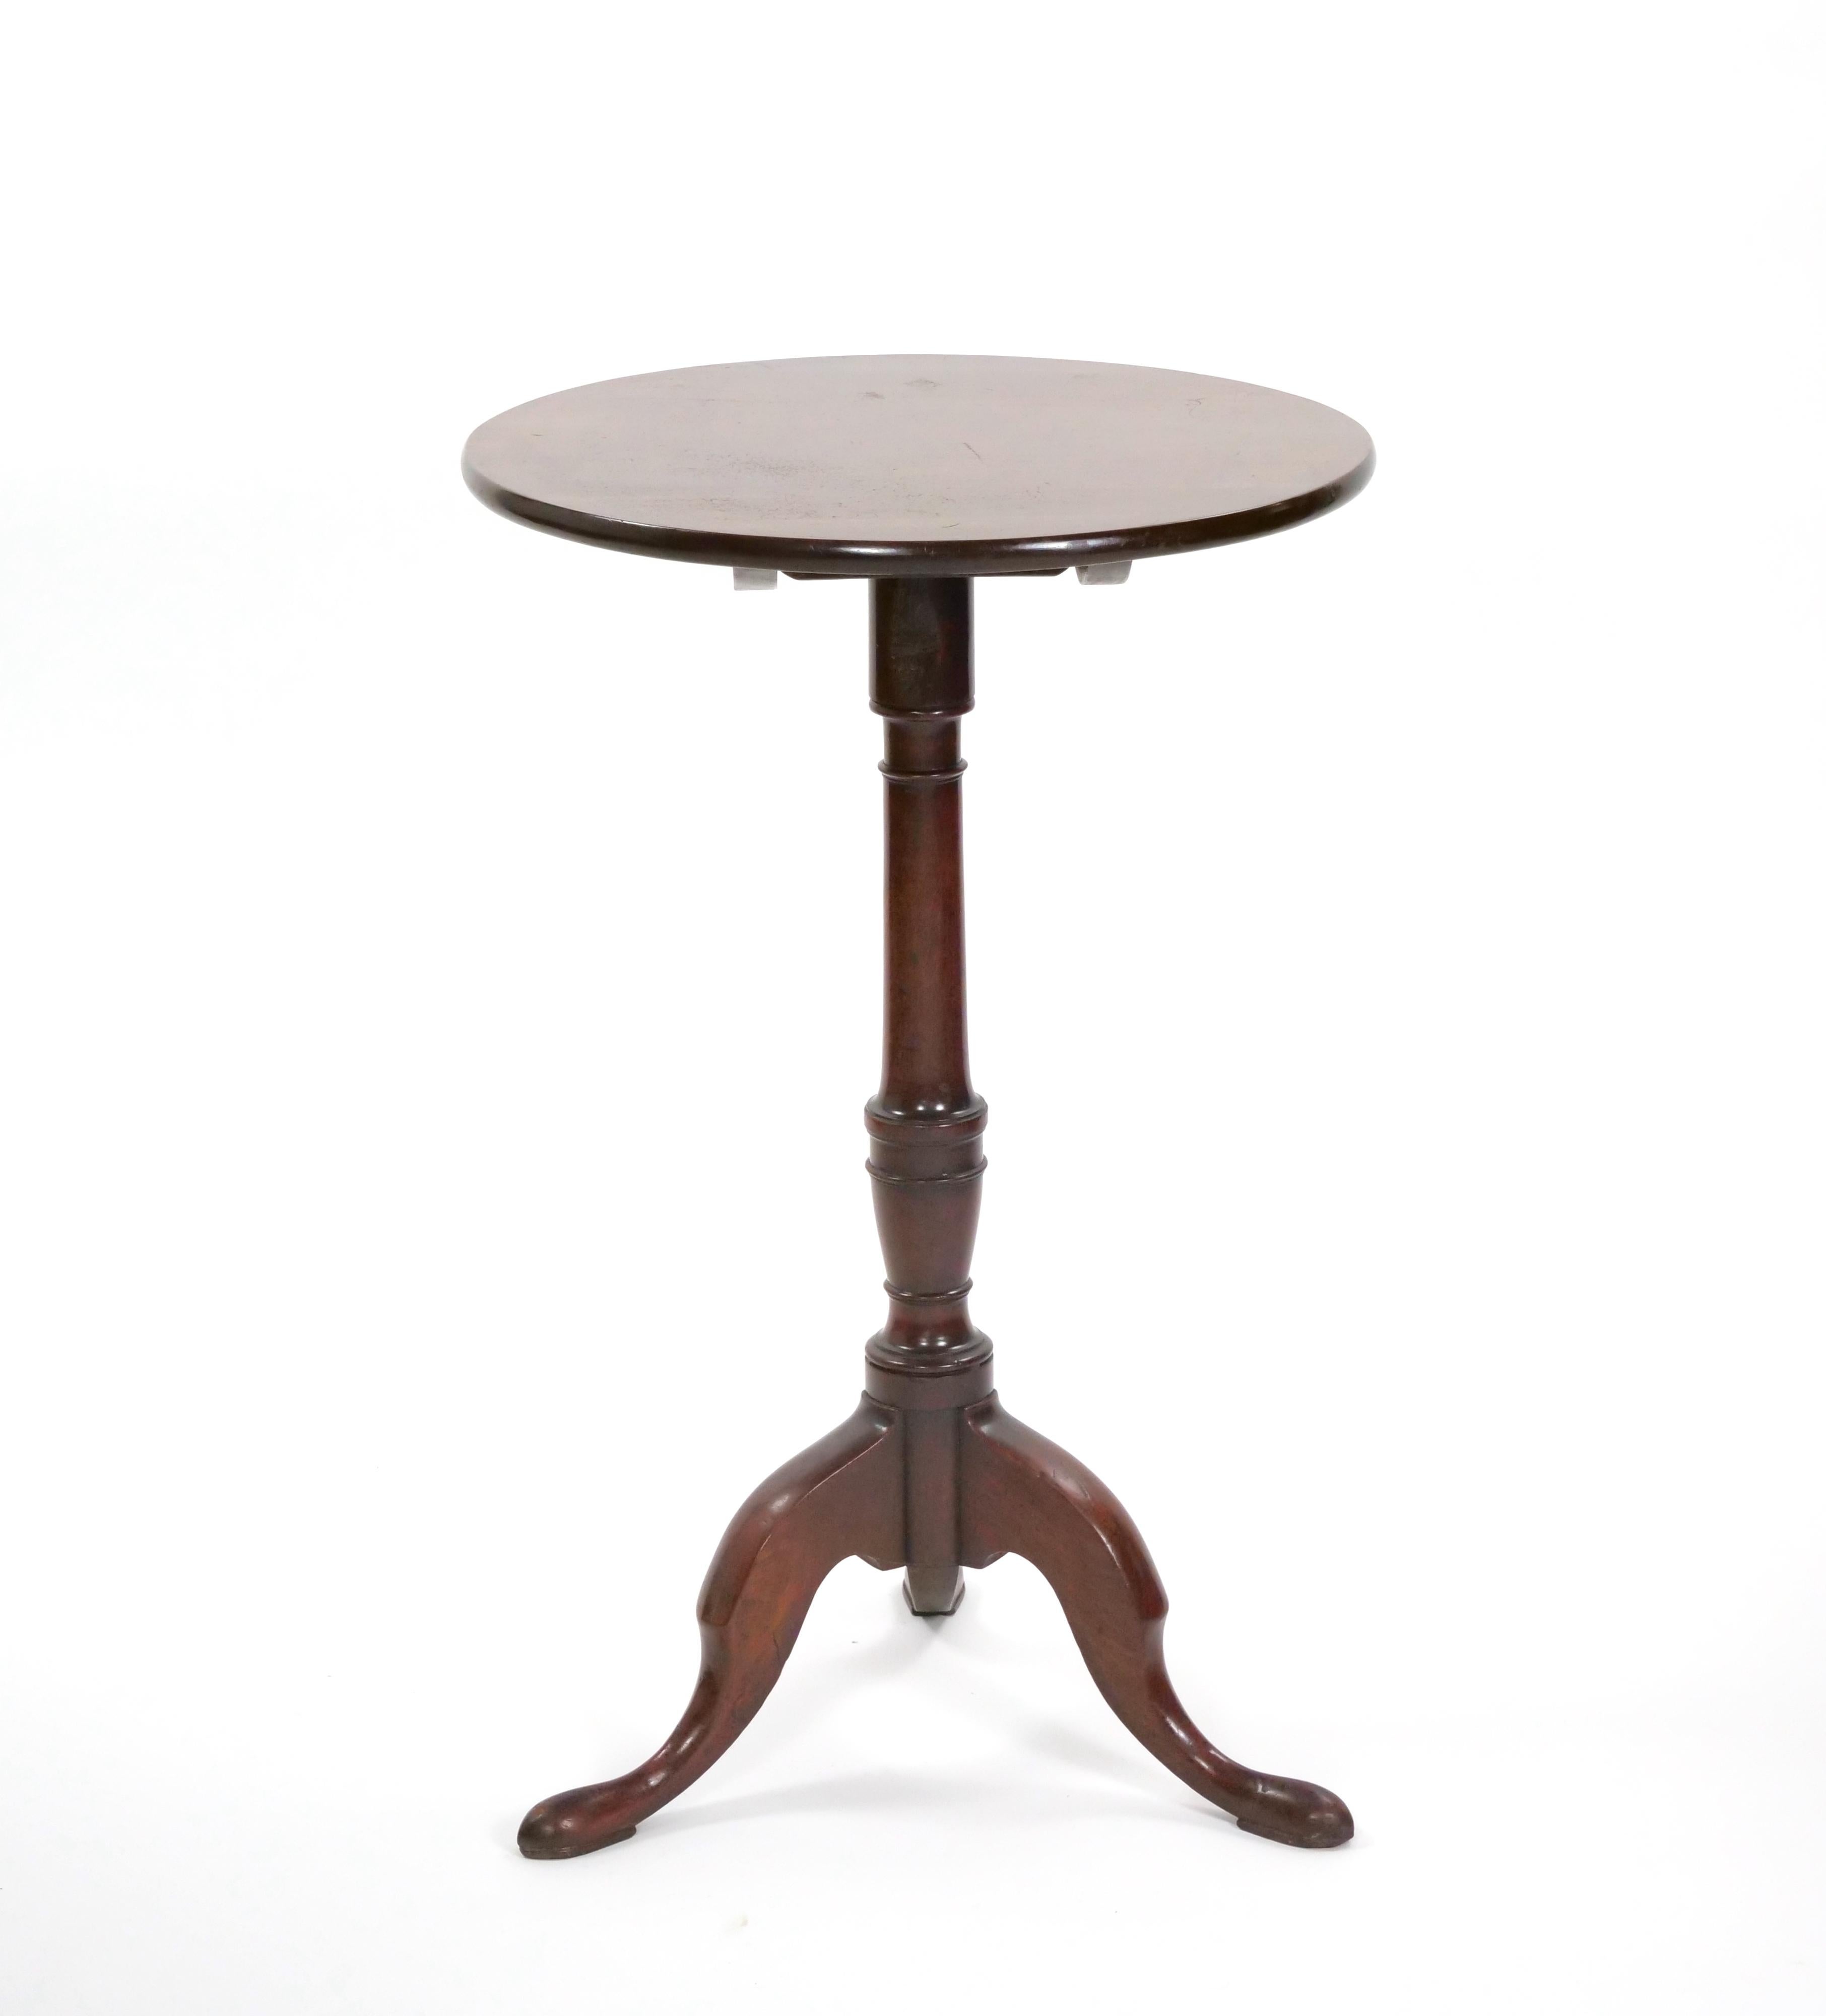 19th Century Victorian Mahogany Tripod Pedestal Candle Stand For Sale 4